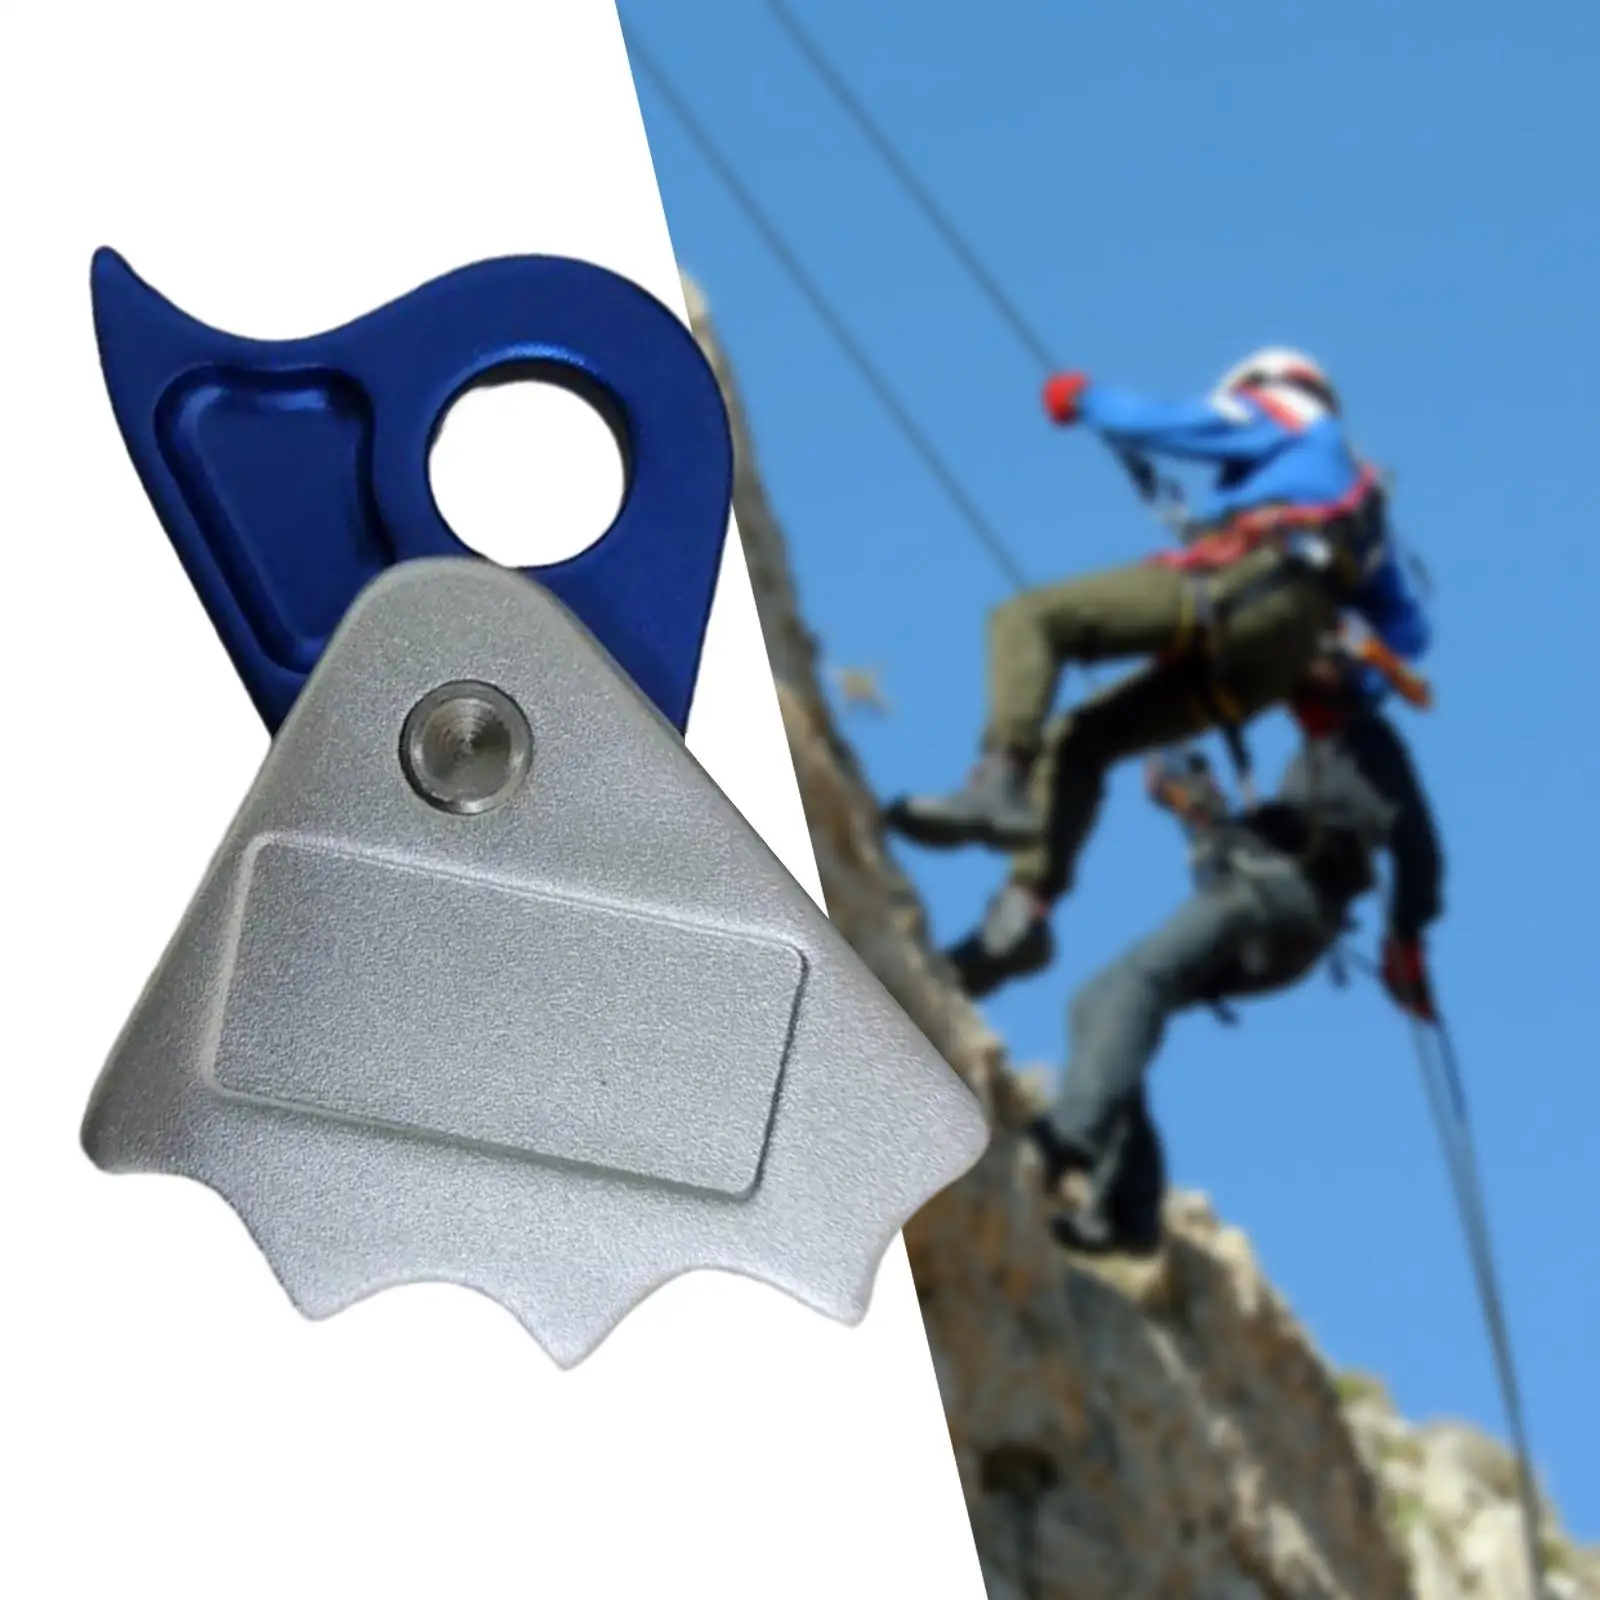 Climbing Rope Grab Grip Clamp Rigging Equipment Falling Arrester Ascender Rope Grabber for Caving, Mountaineering, Rappelling